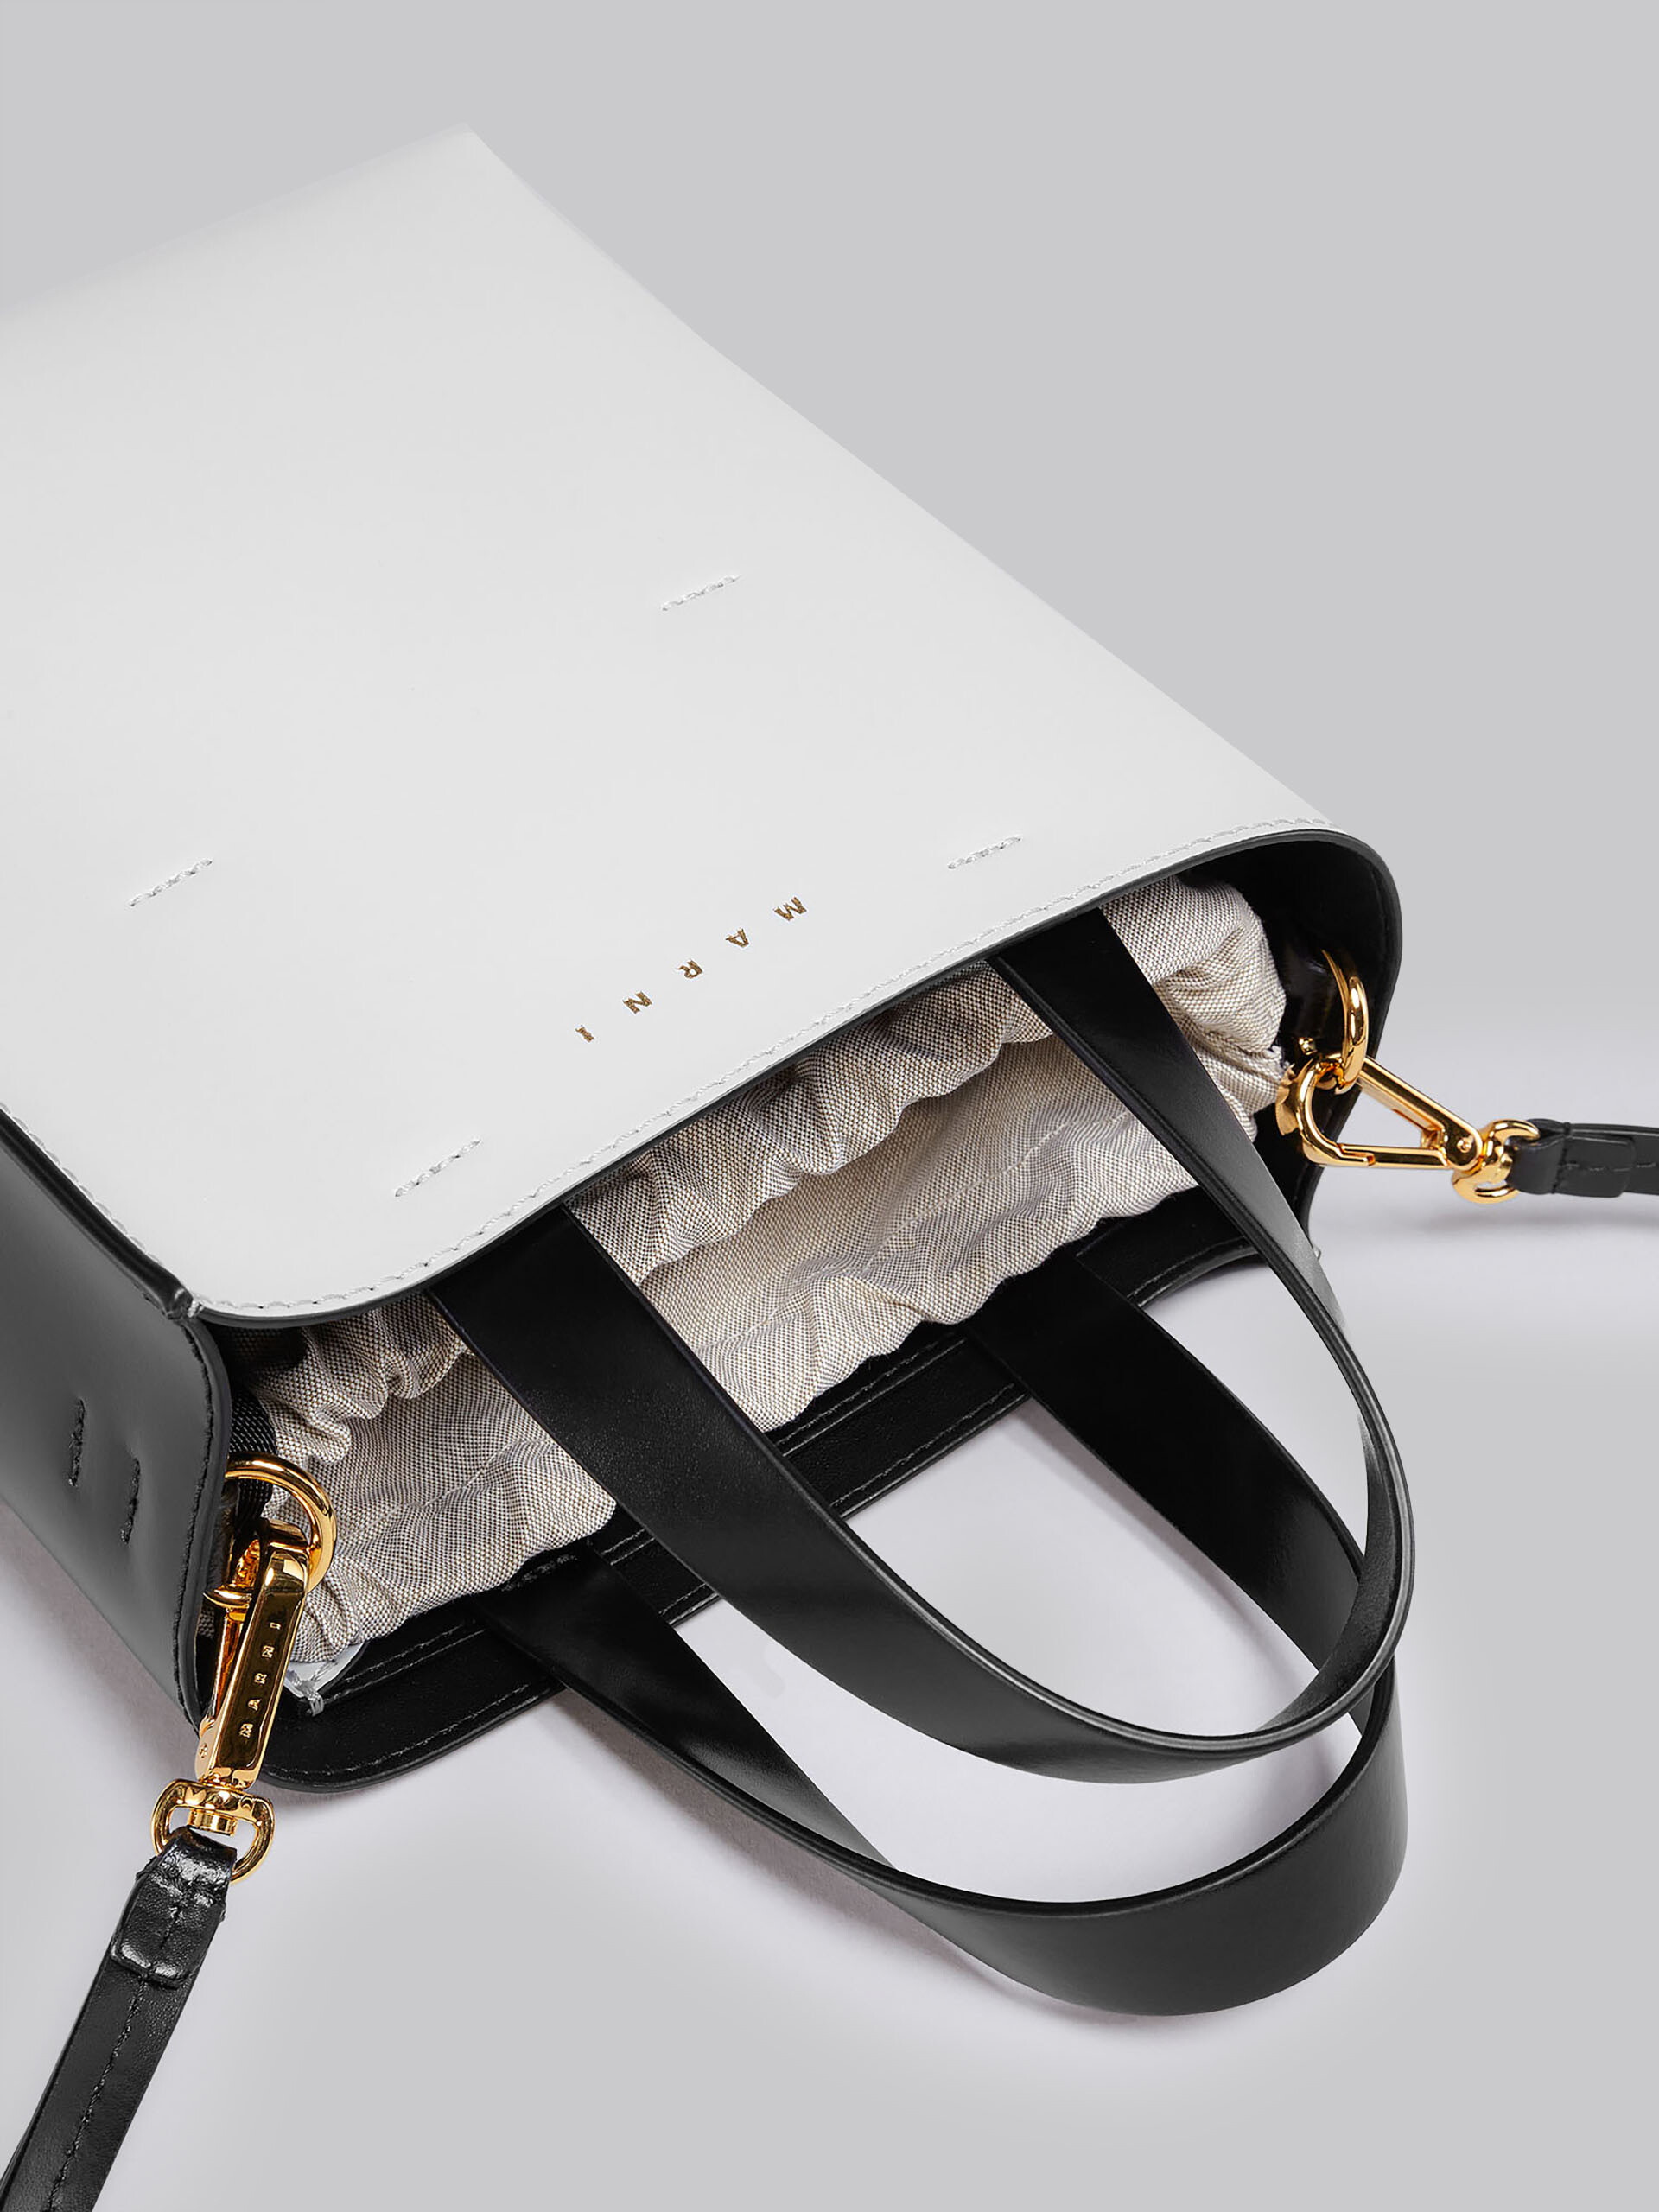 MUSEO mini bag in white and black leather - Shopping Bags - Image 4